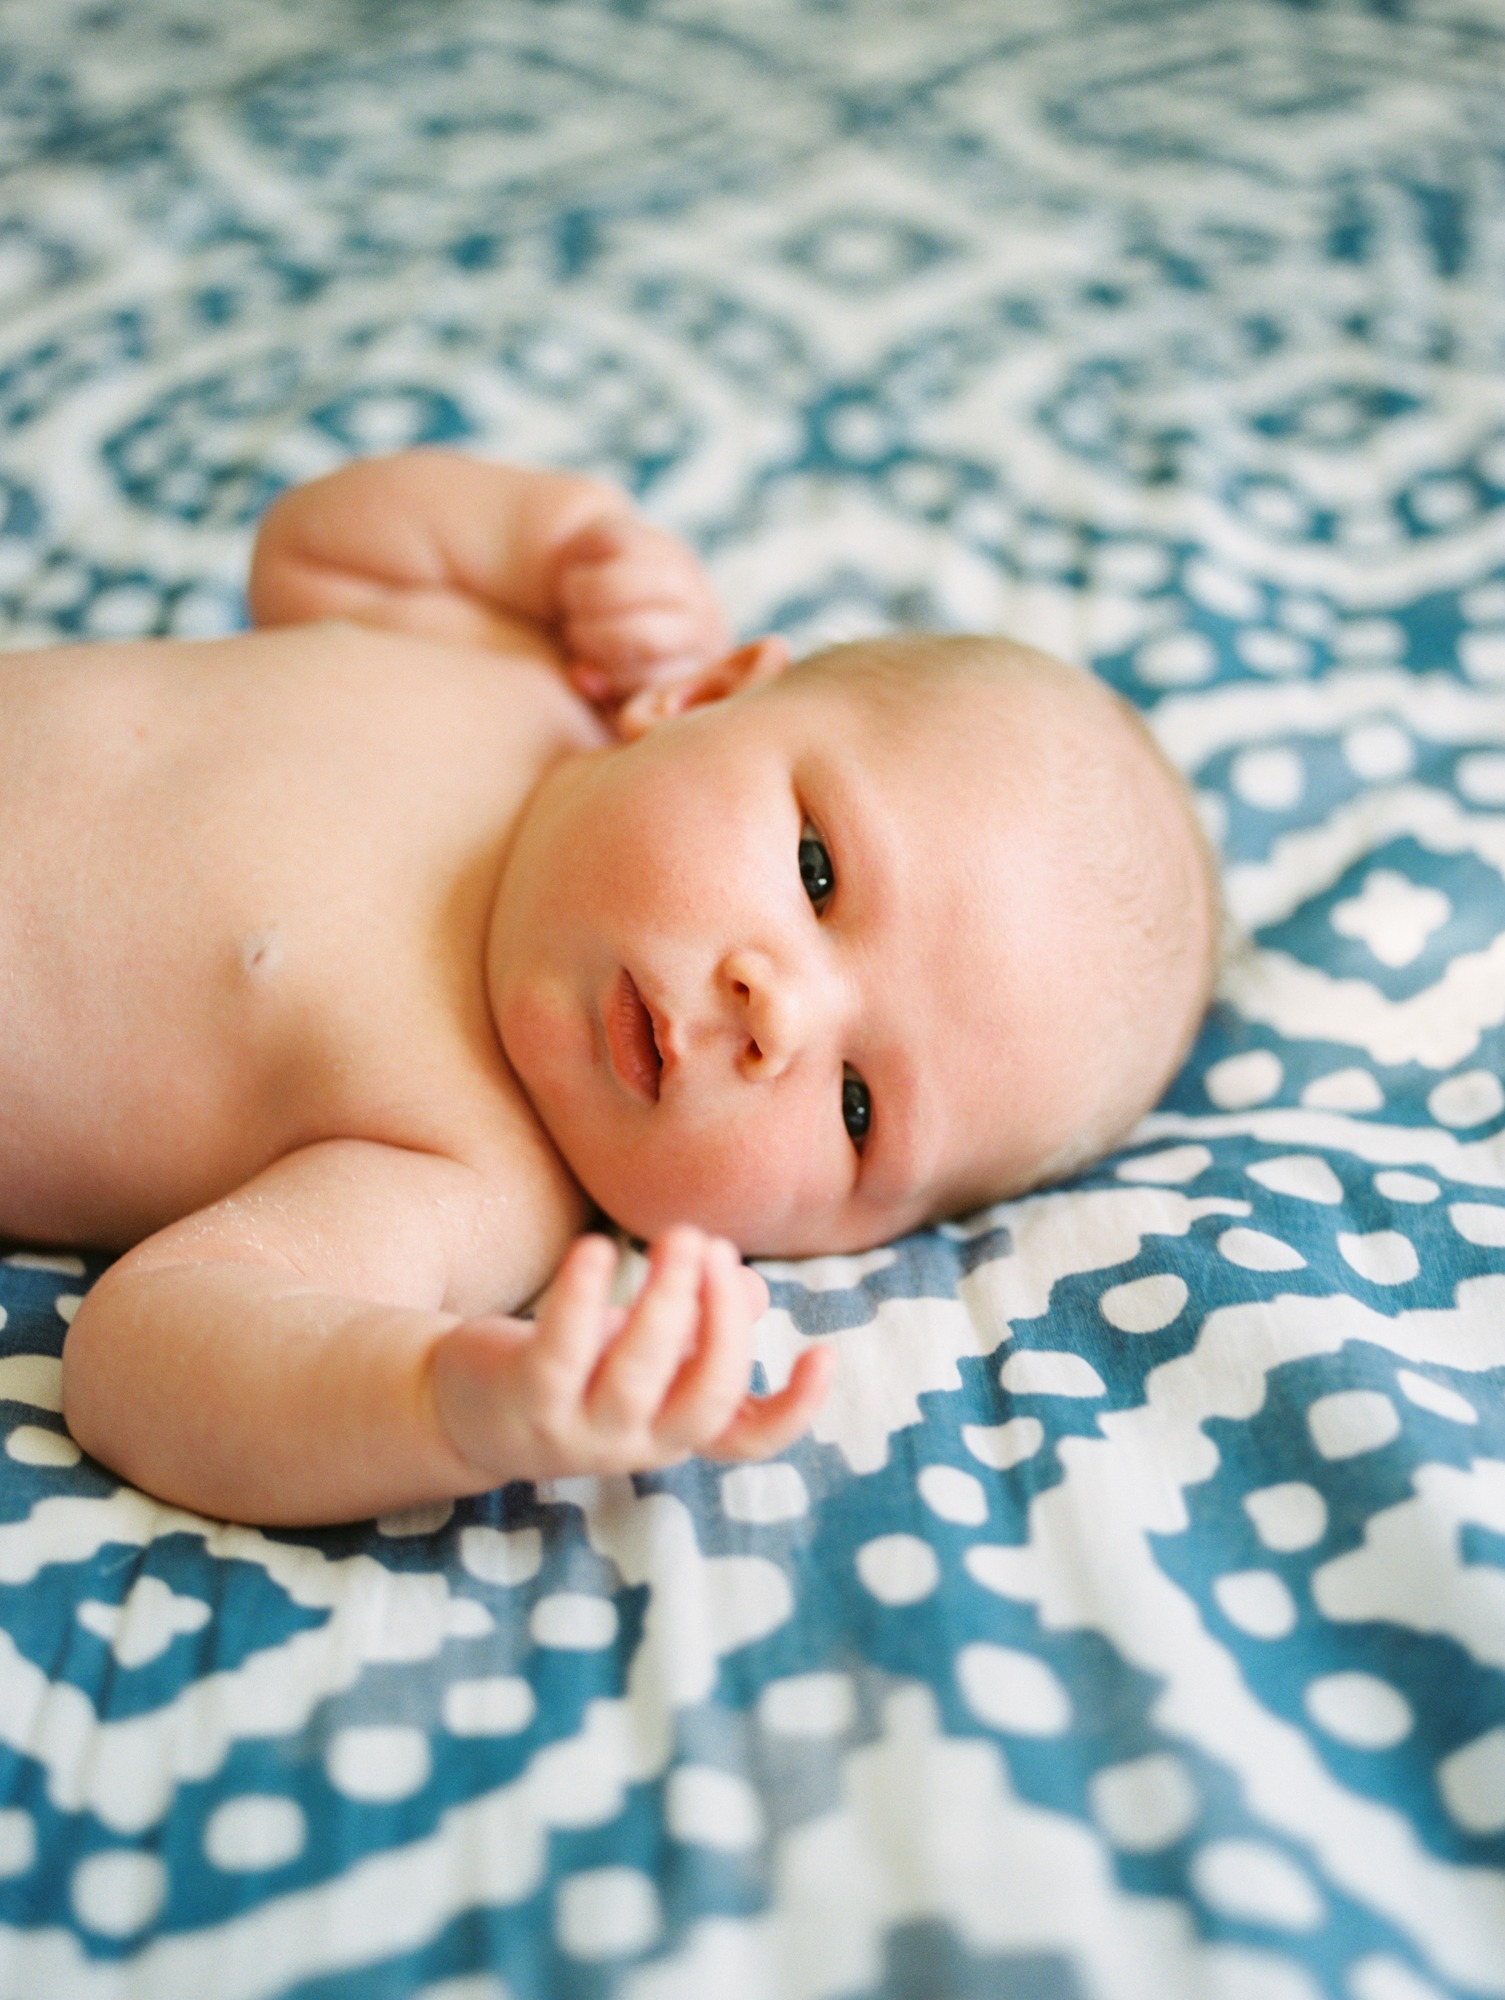 beauitful chunky baby lies on a blue and white patterned bedspread